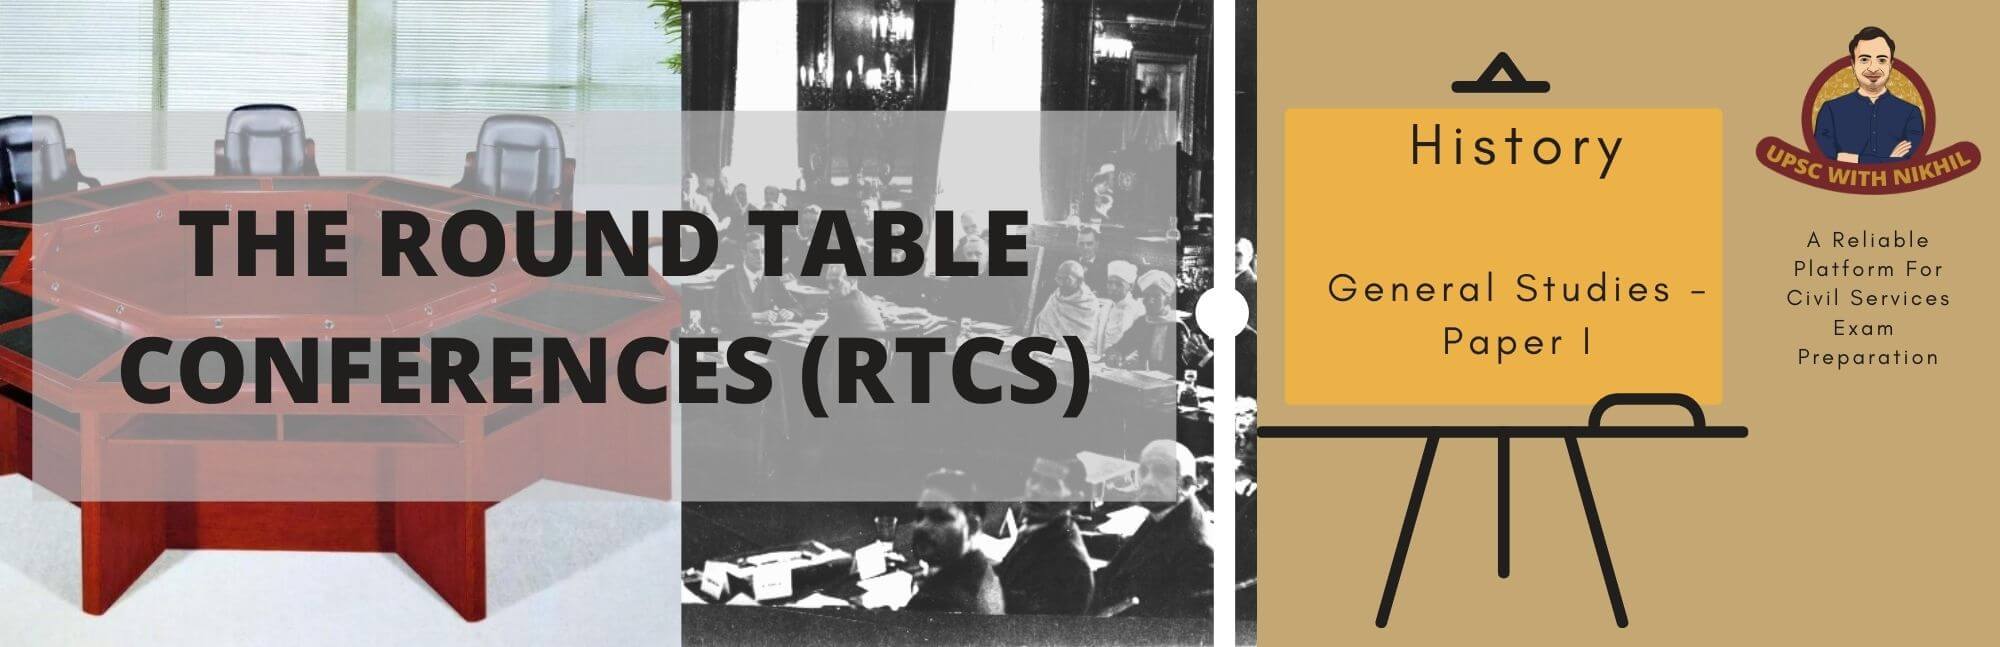 The Round Table Conferences Rtcs, Why Round Table Conference Held